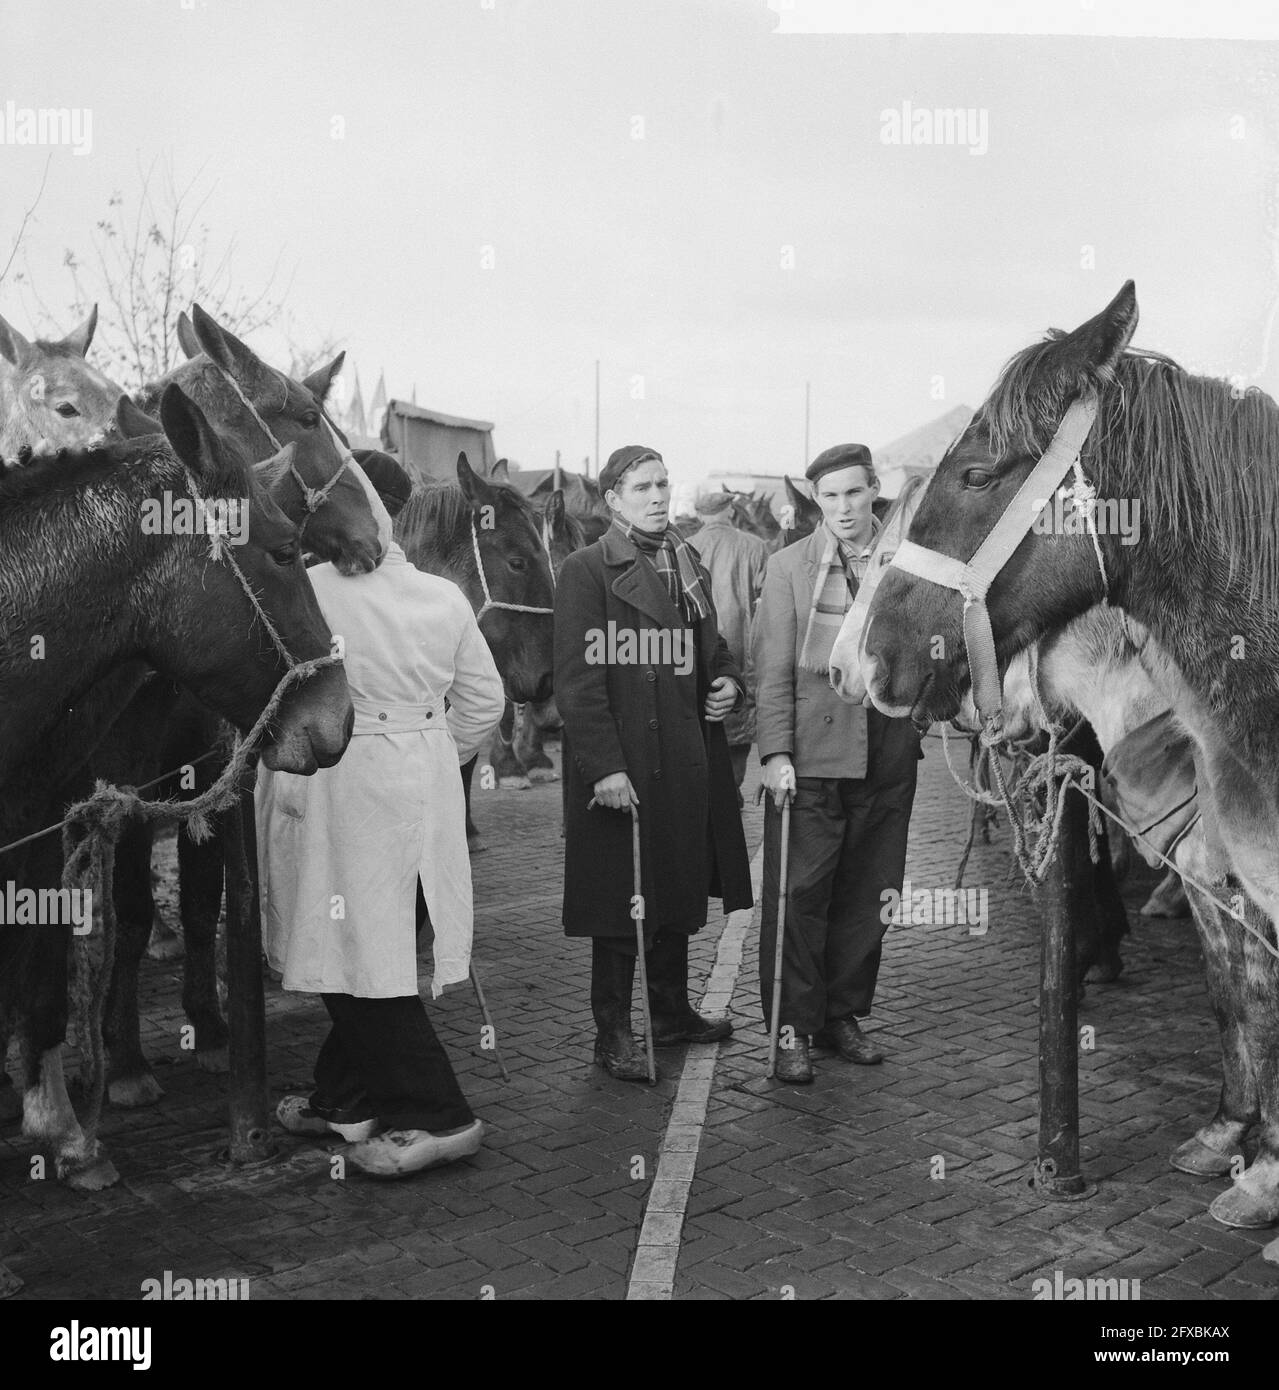 Annual horse market in Hedel, November 7, 1960, horse markets, The Netherlands, 20th century press agency photo, news to remember, documentary, historic photography 1945-1990, visual stories, human history of the Twentieth Century, capturing moments in time Stock Photo